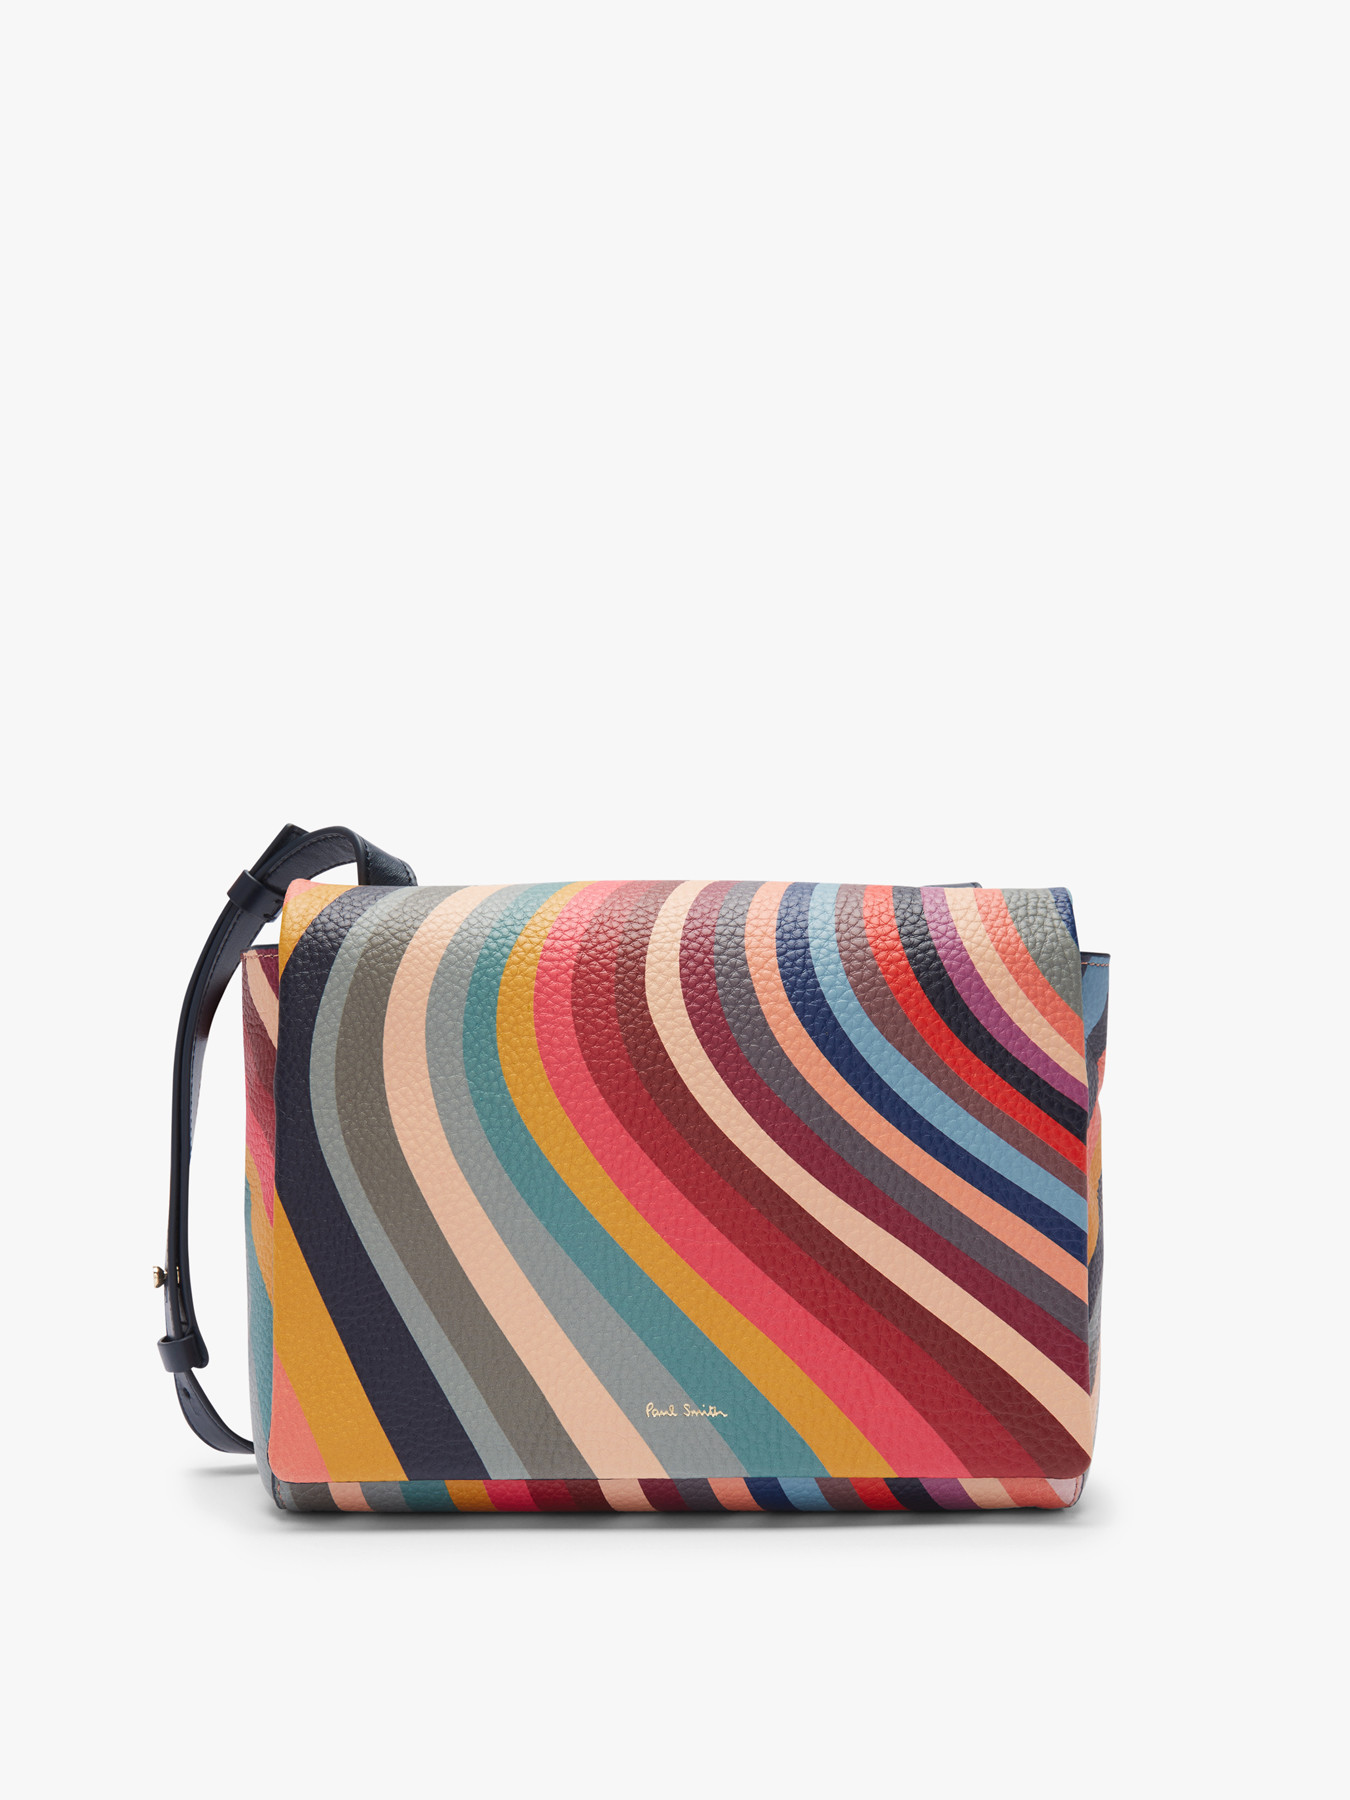 Paul Smith Bags, Buy Now, Hotsell, 57% OFF, www.acananortheast.com